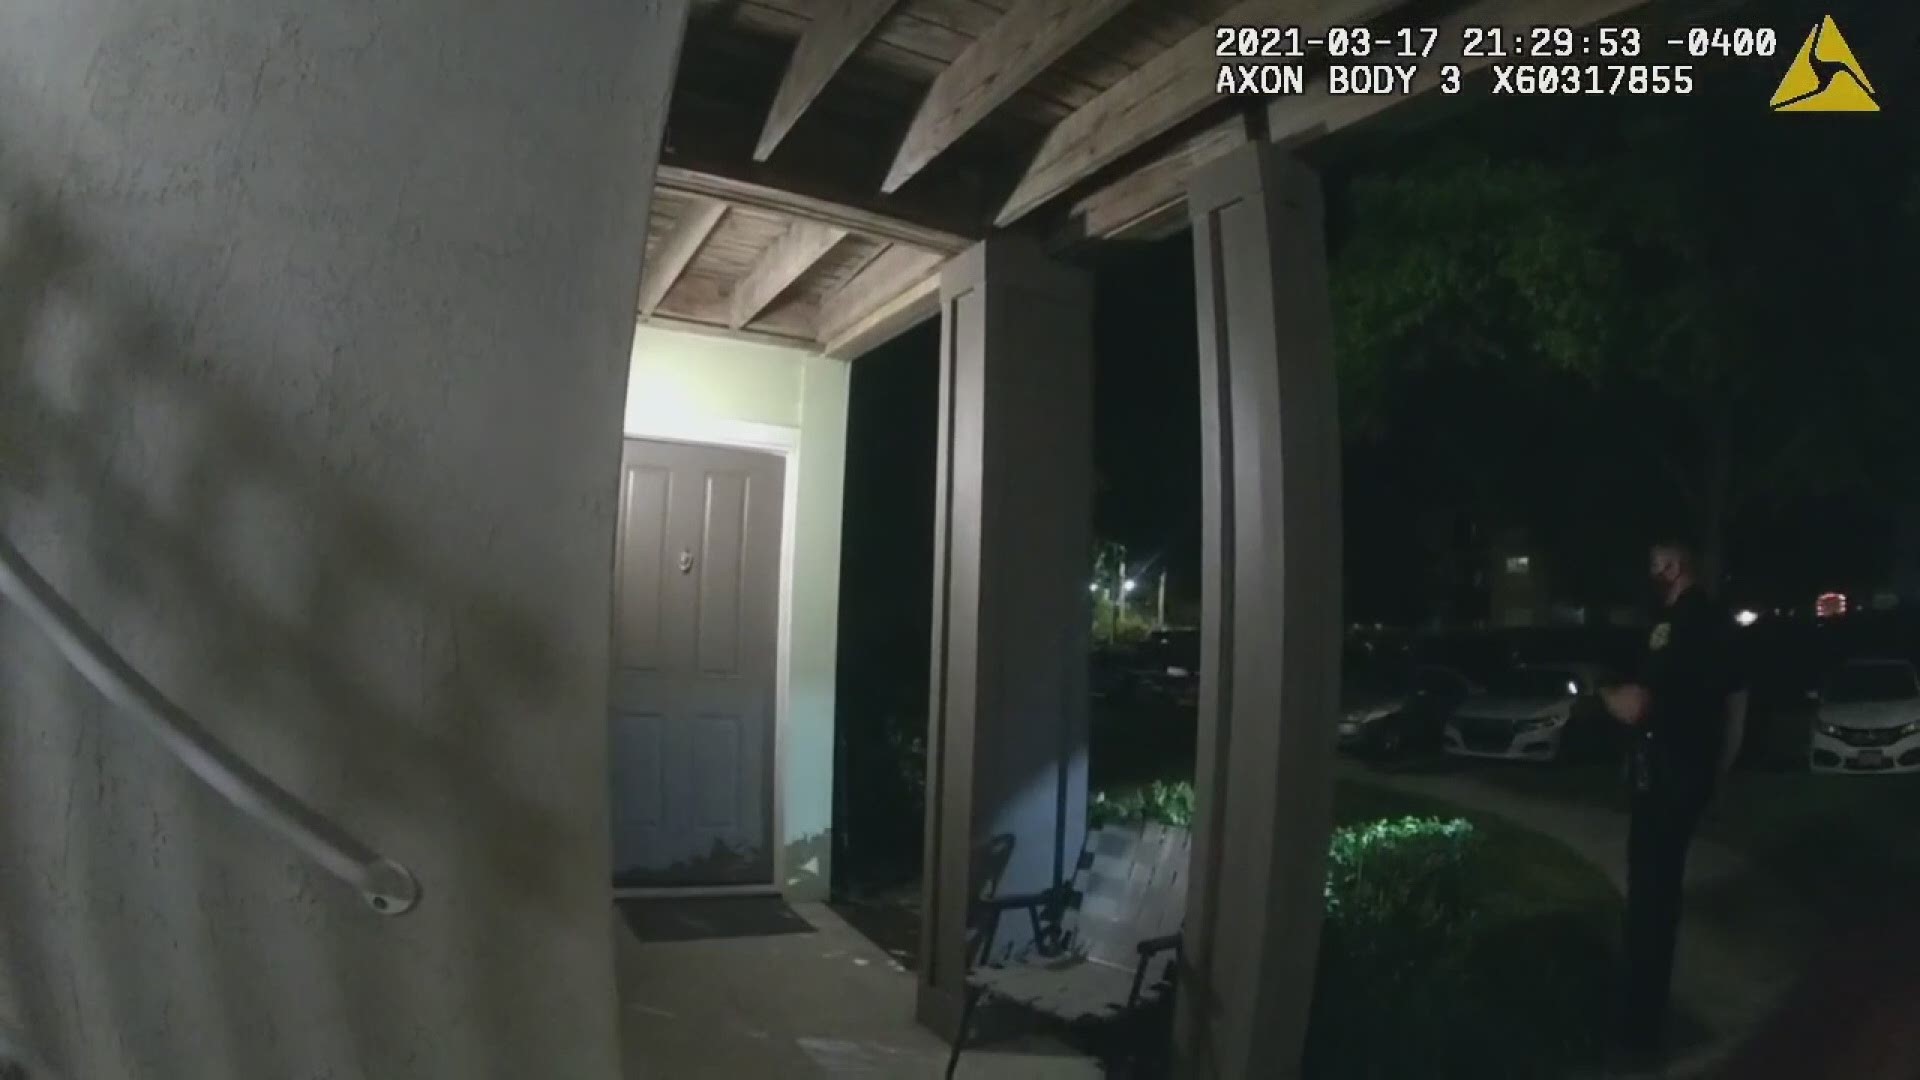 Body camera video captured the moment a Tampa police officer shot a dog that ran toward her.